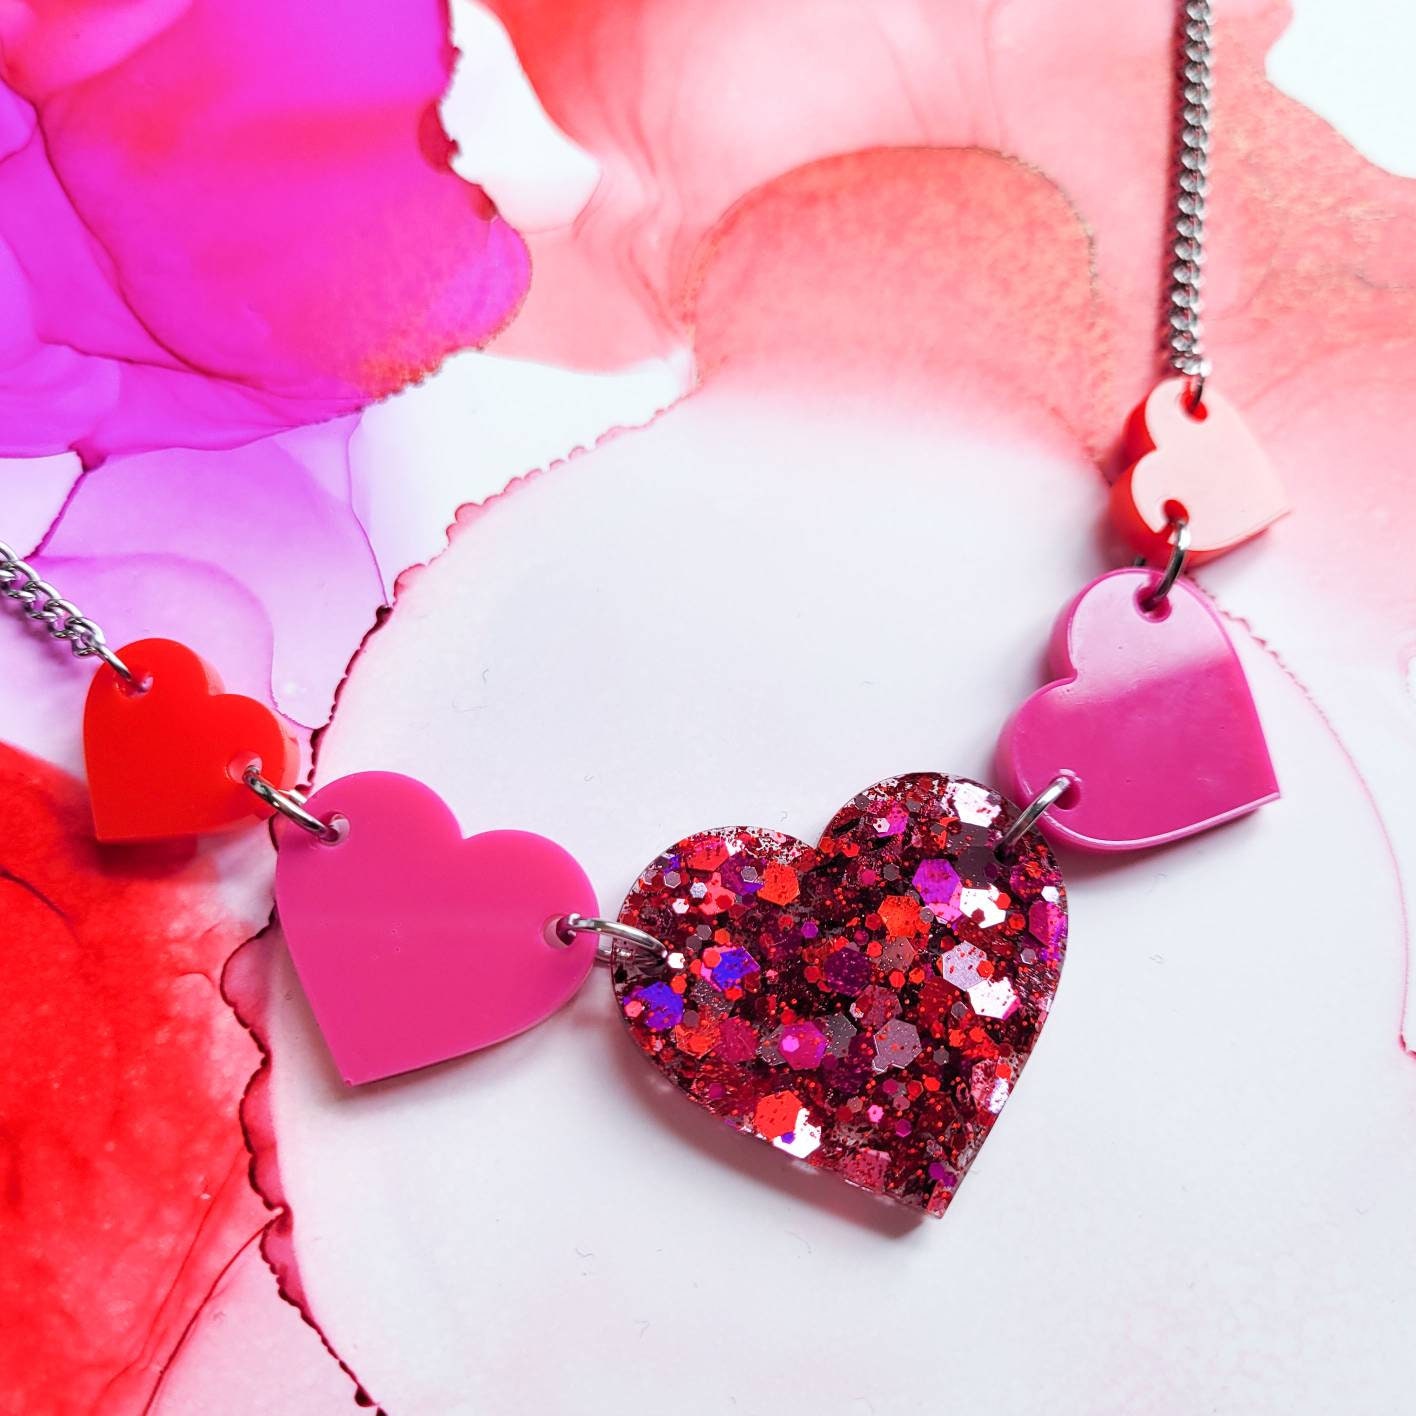 Handmade Pink, Red & Glitter Hearts Resin Necklace On Stainless Steel Chain, Women Gift